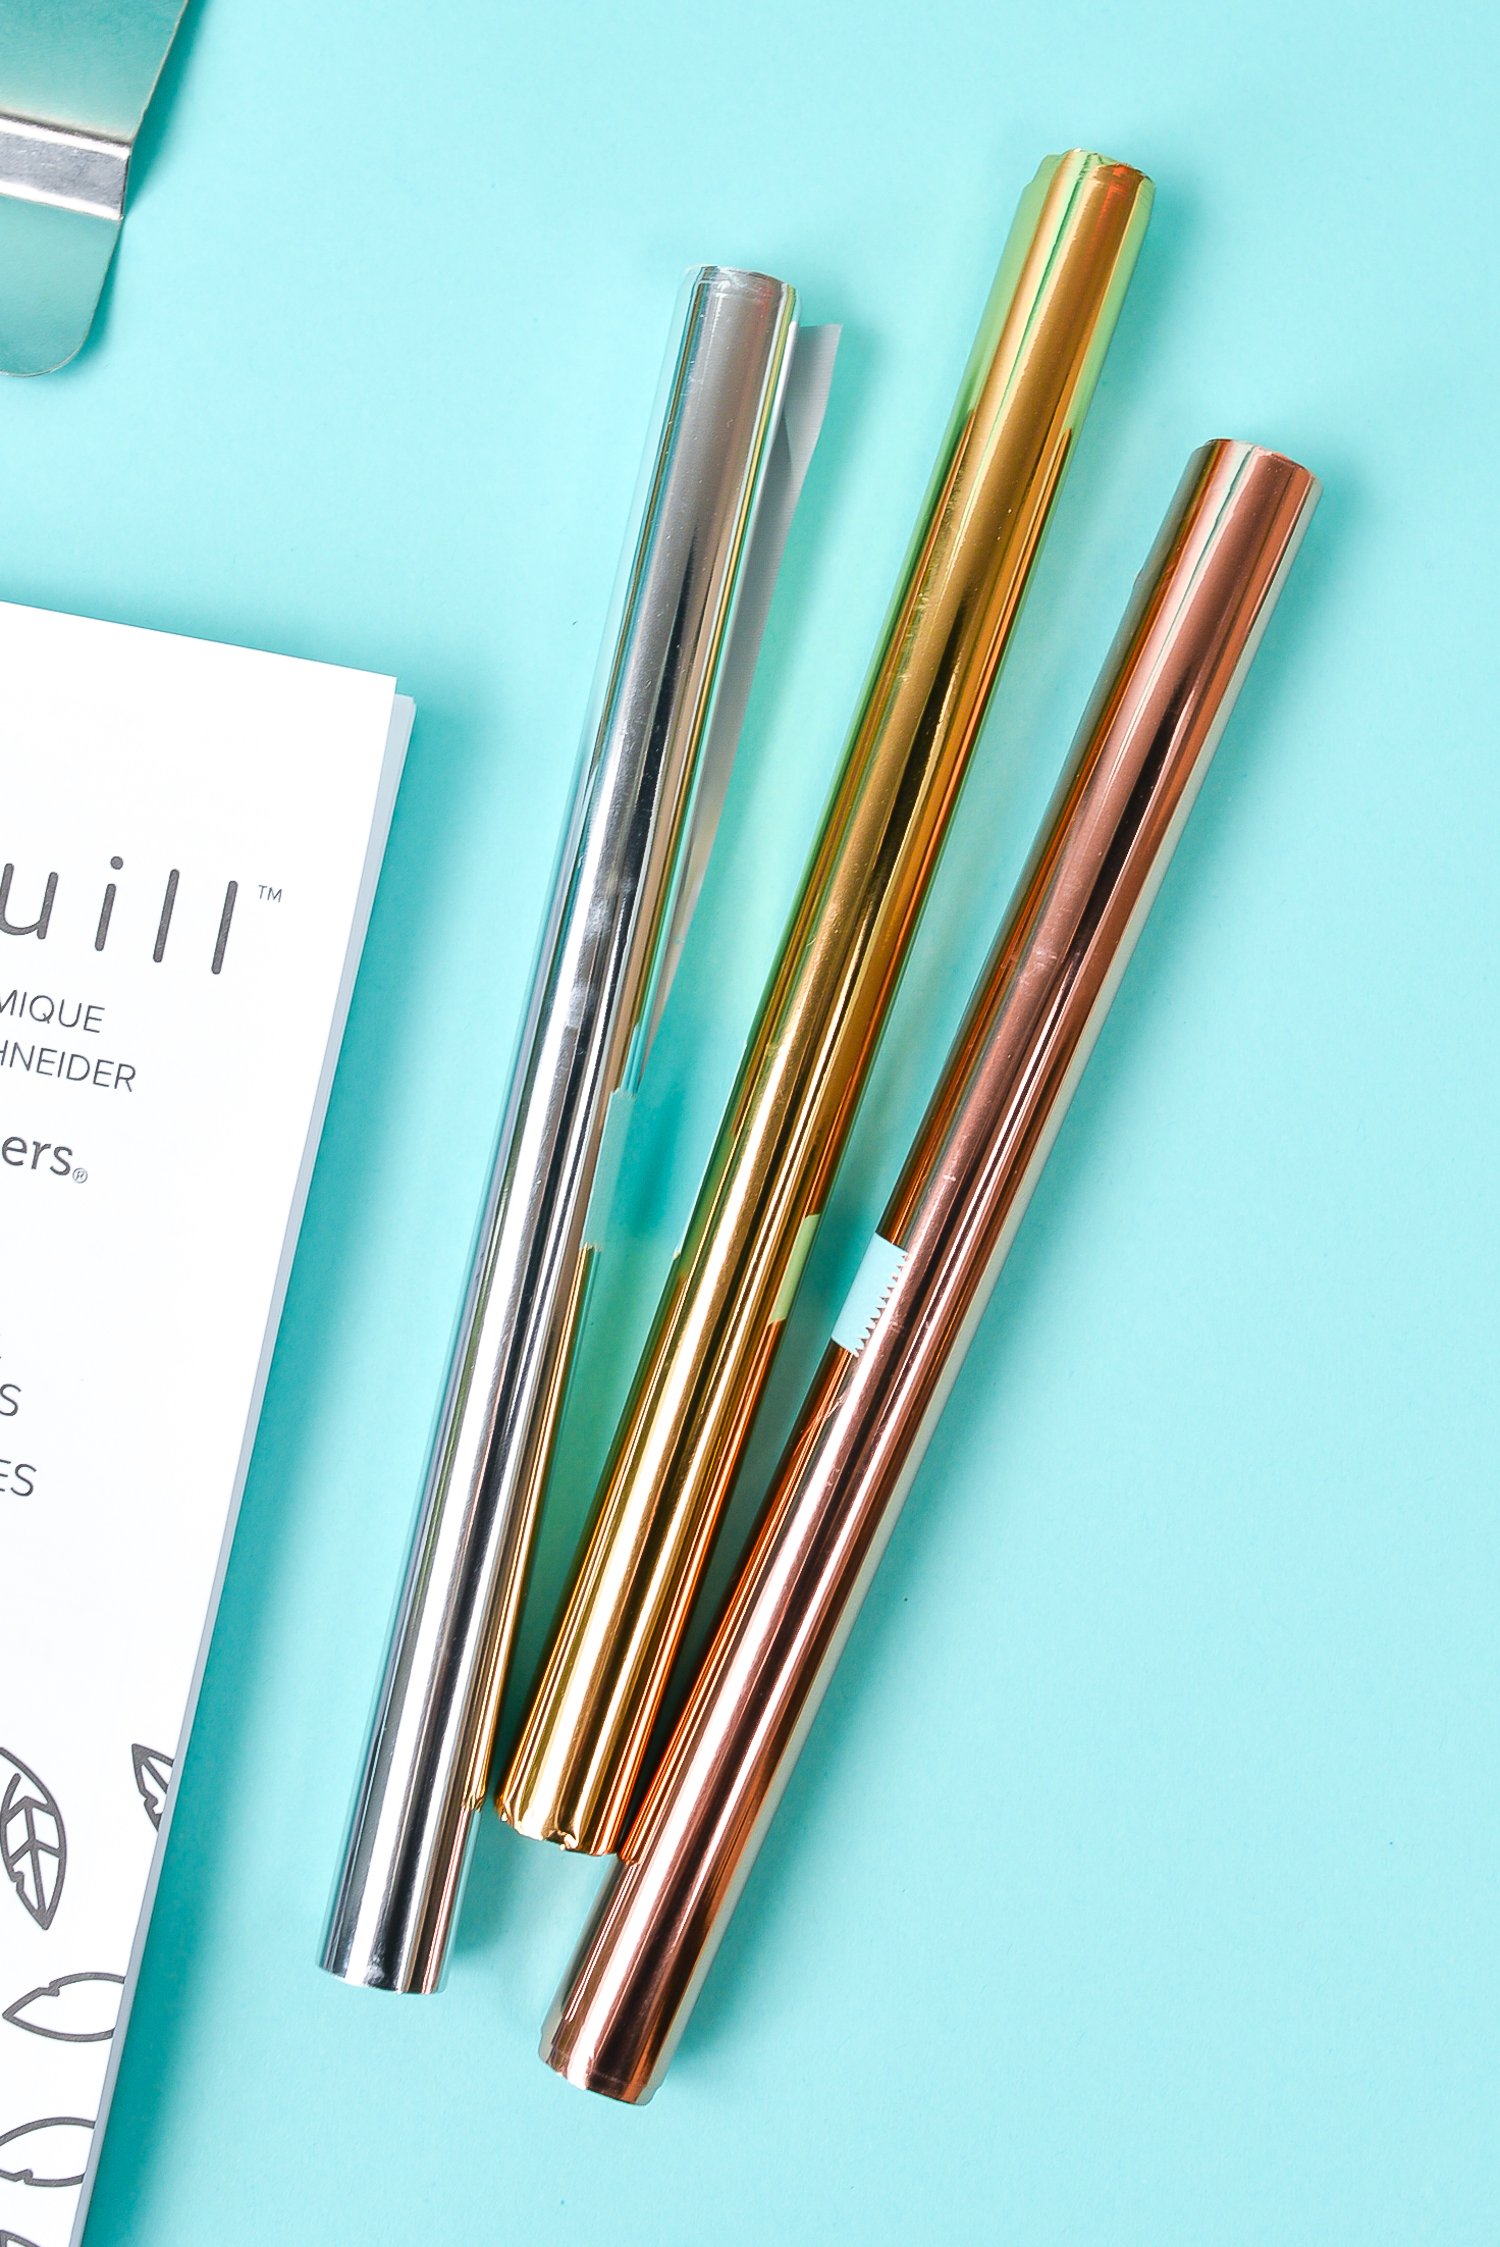 Foil Quill by We R Memory Keepers - Three Colors of Foil